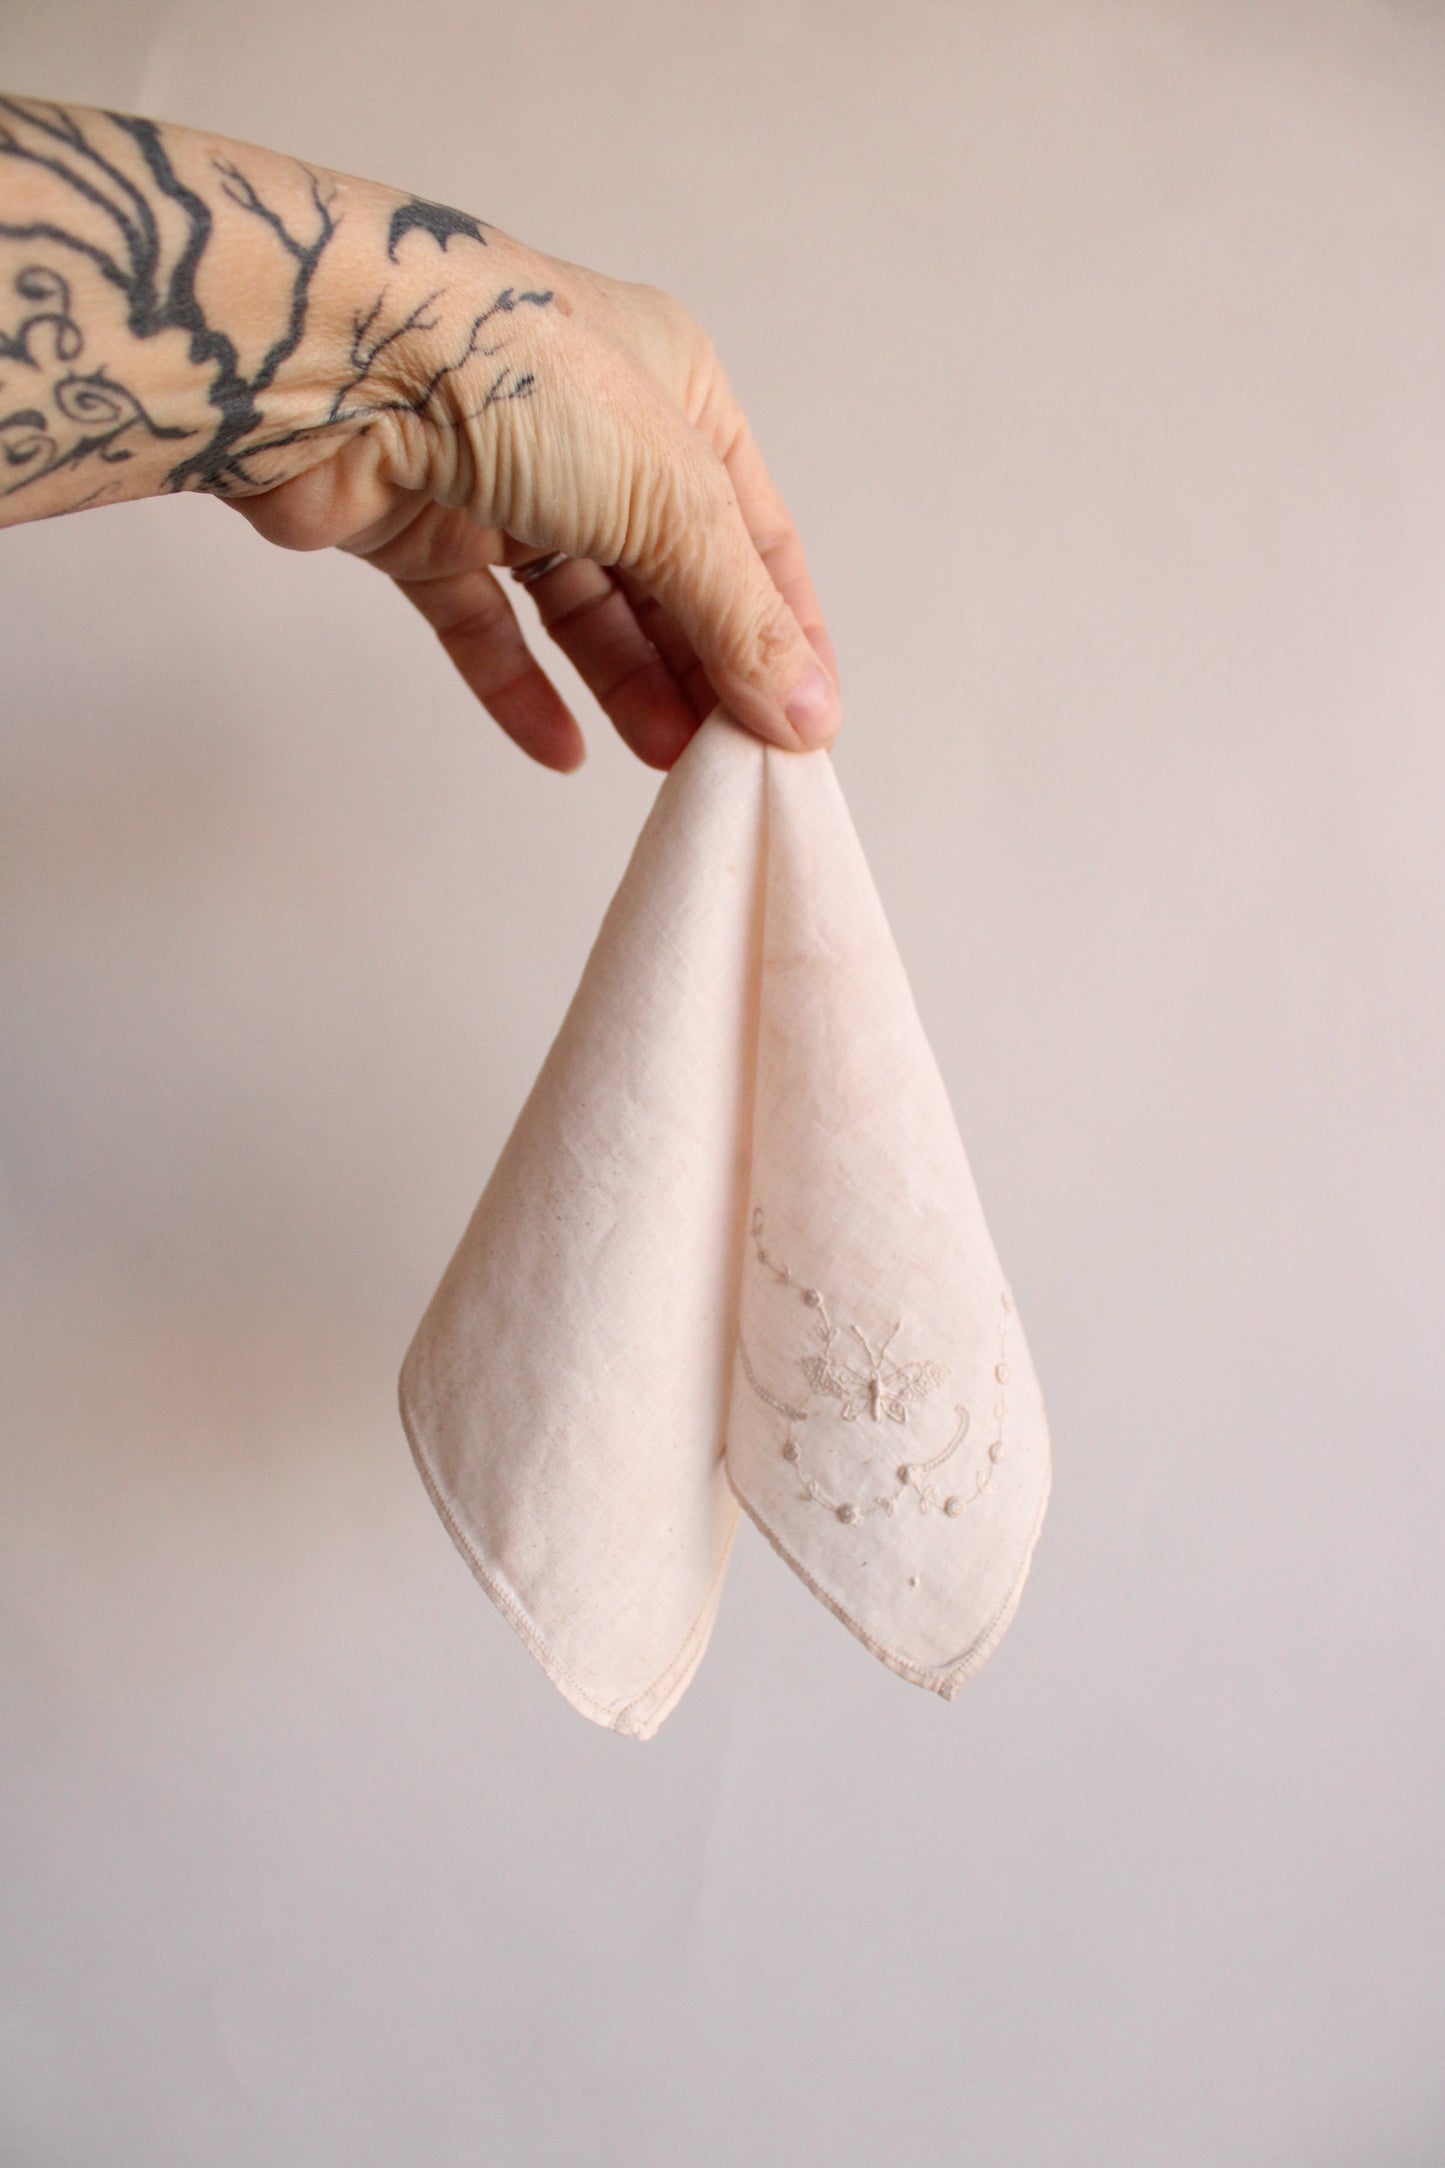 "Moth Wing" Hand Plant Dyed Vintage Handkerchief in Mottled Dusty Pink